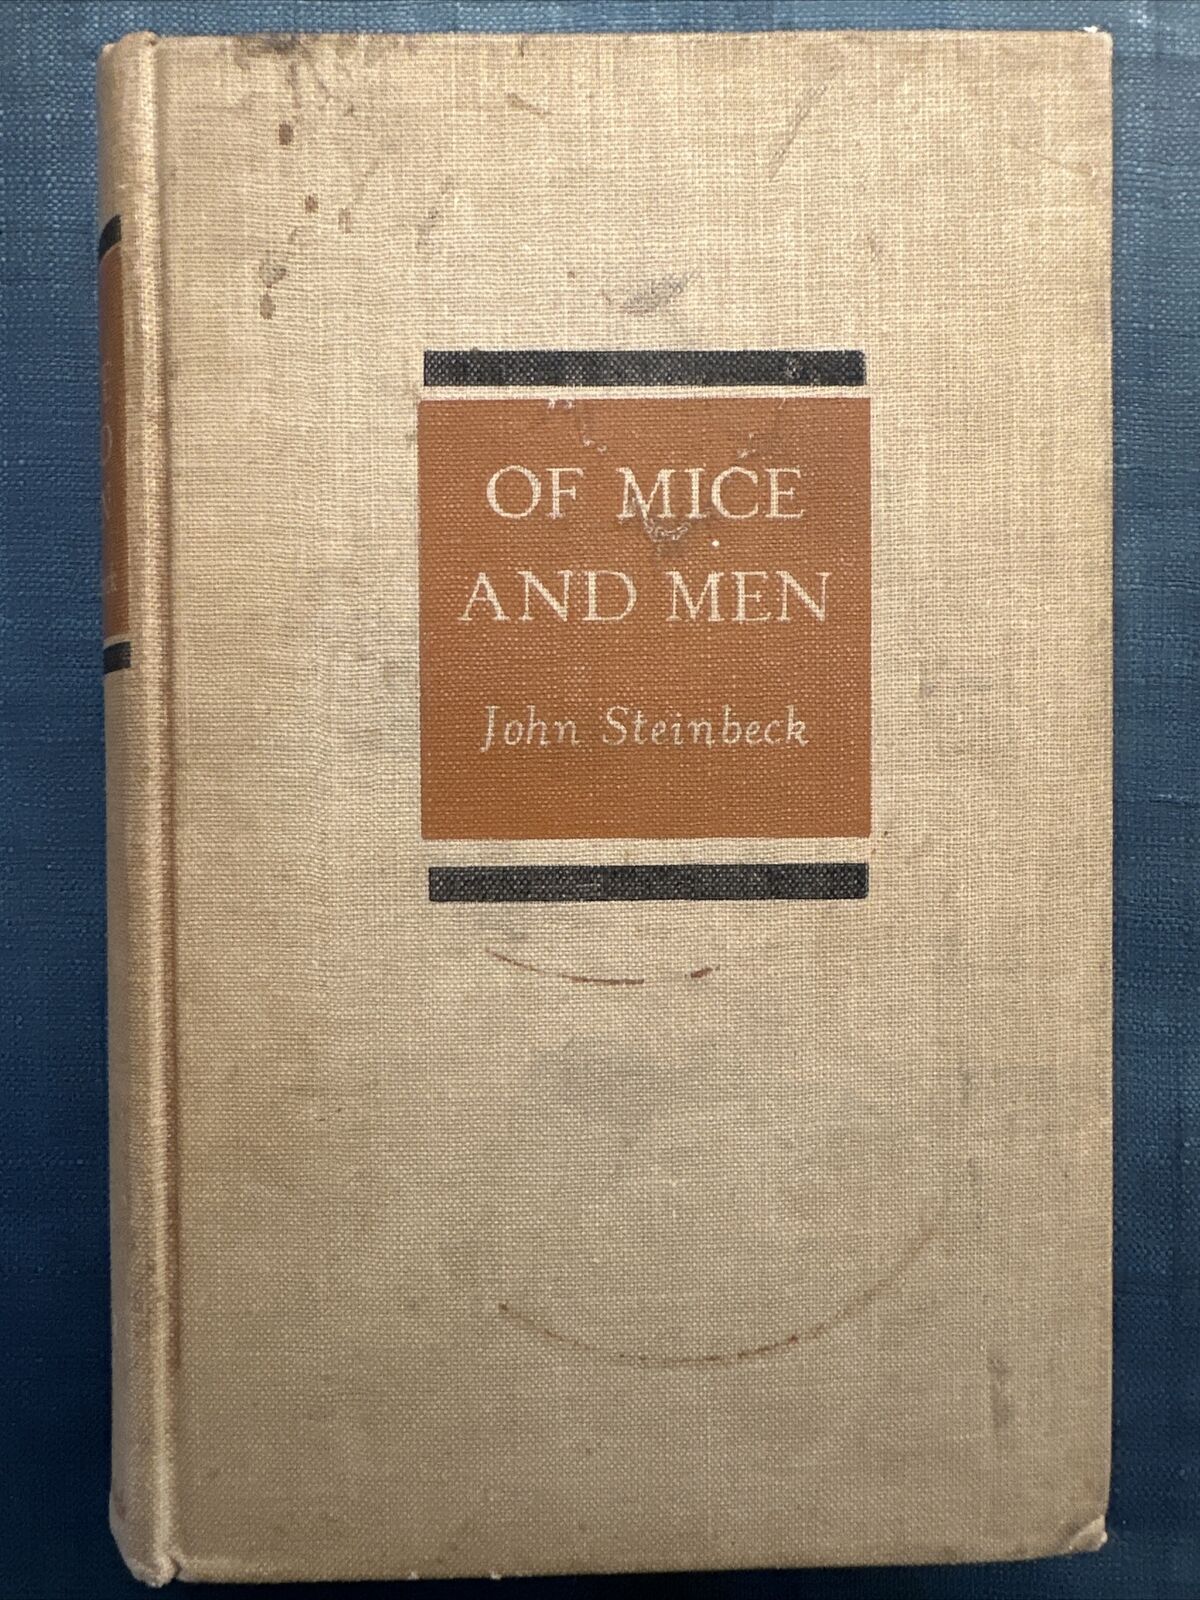 Of Mice And Men by John Steinbeck First Edition 1937 1st print VG Cond Vintage